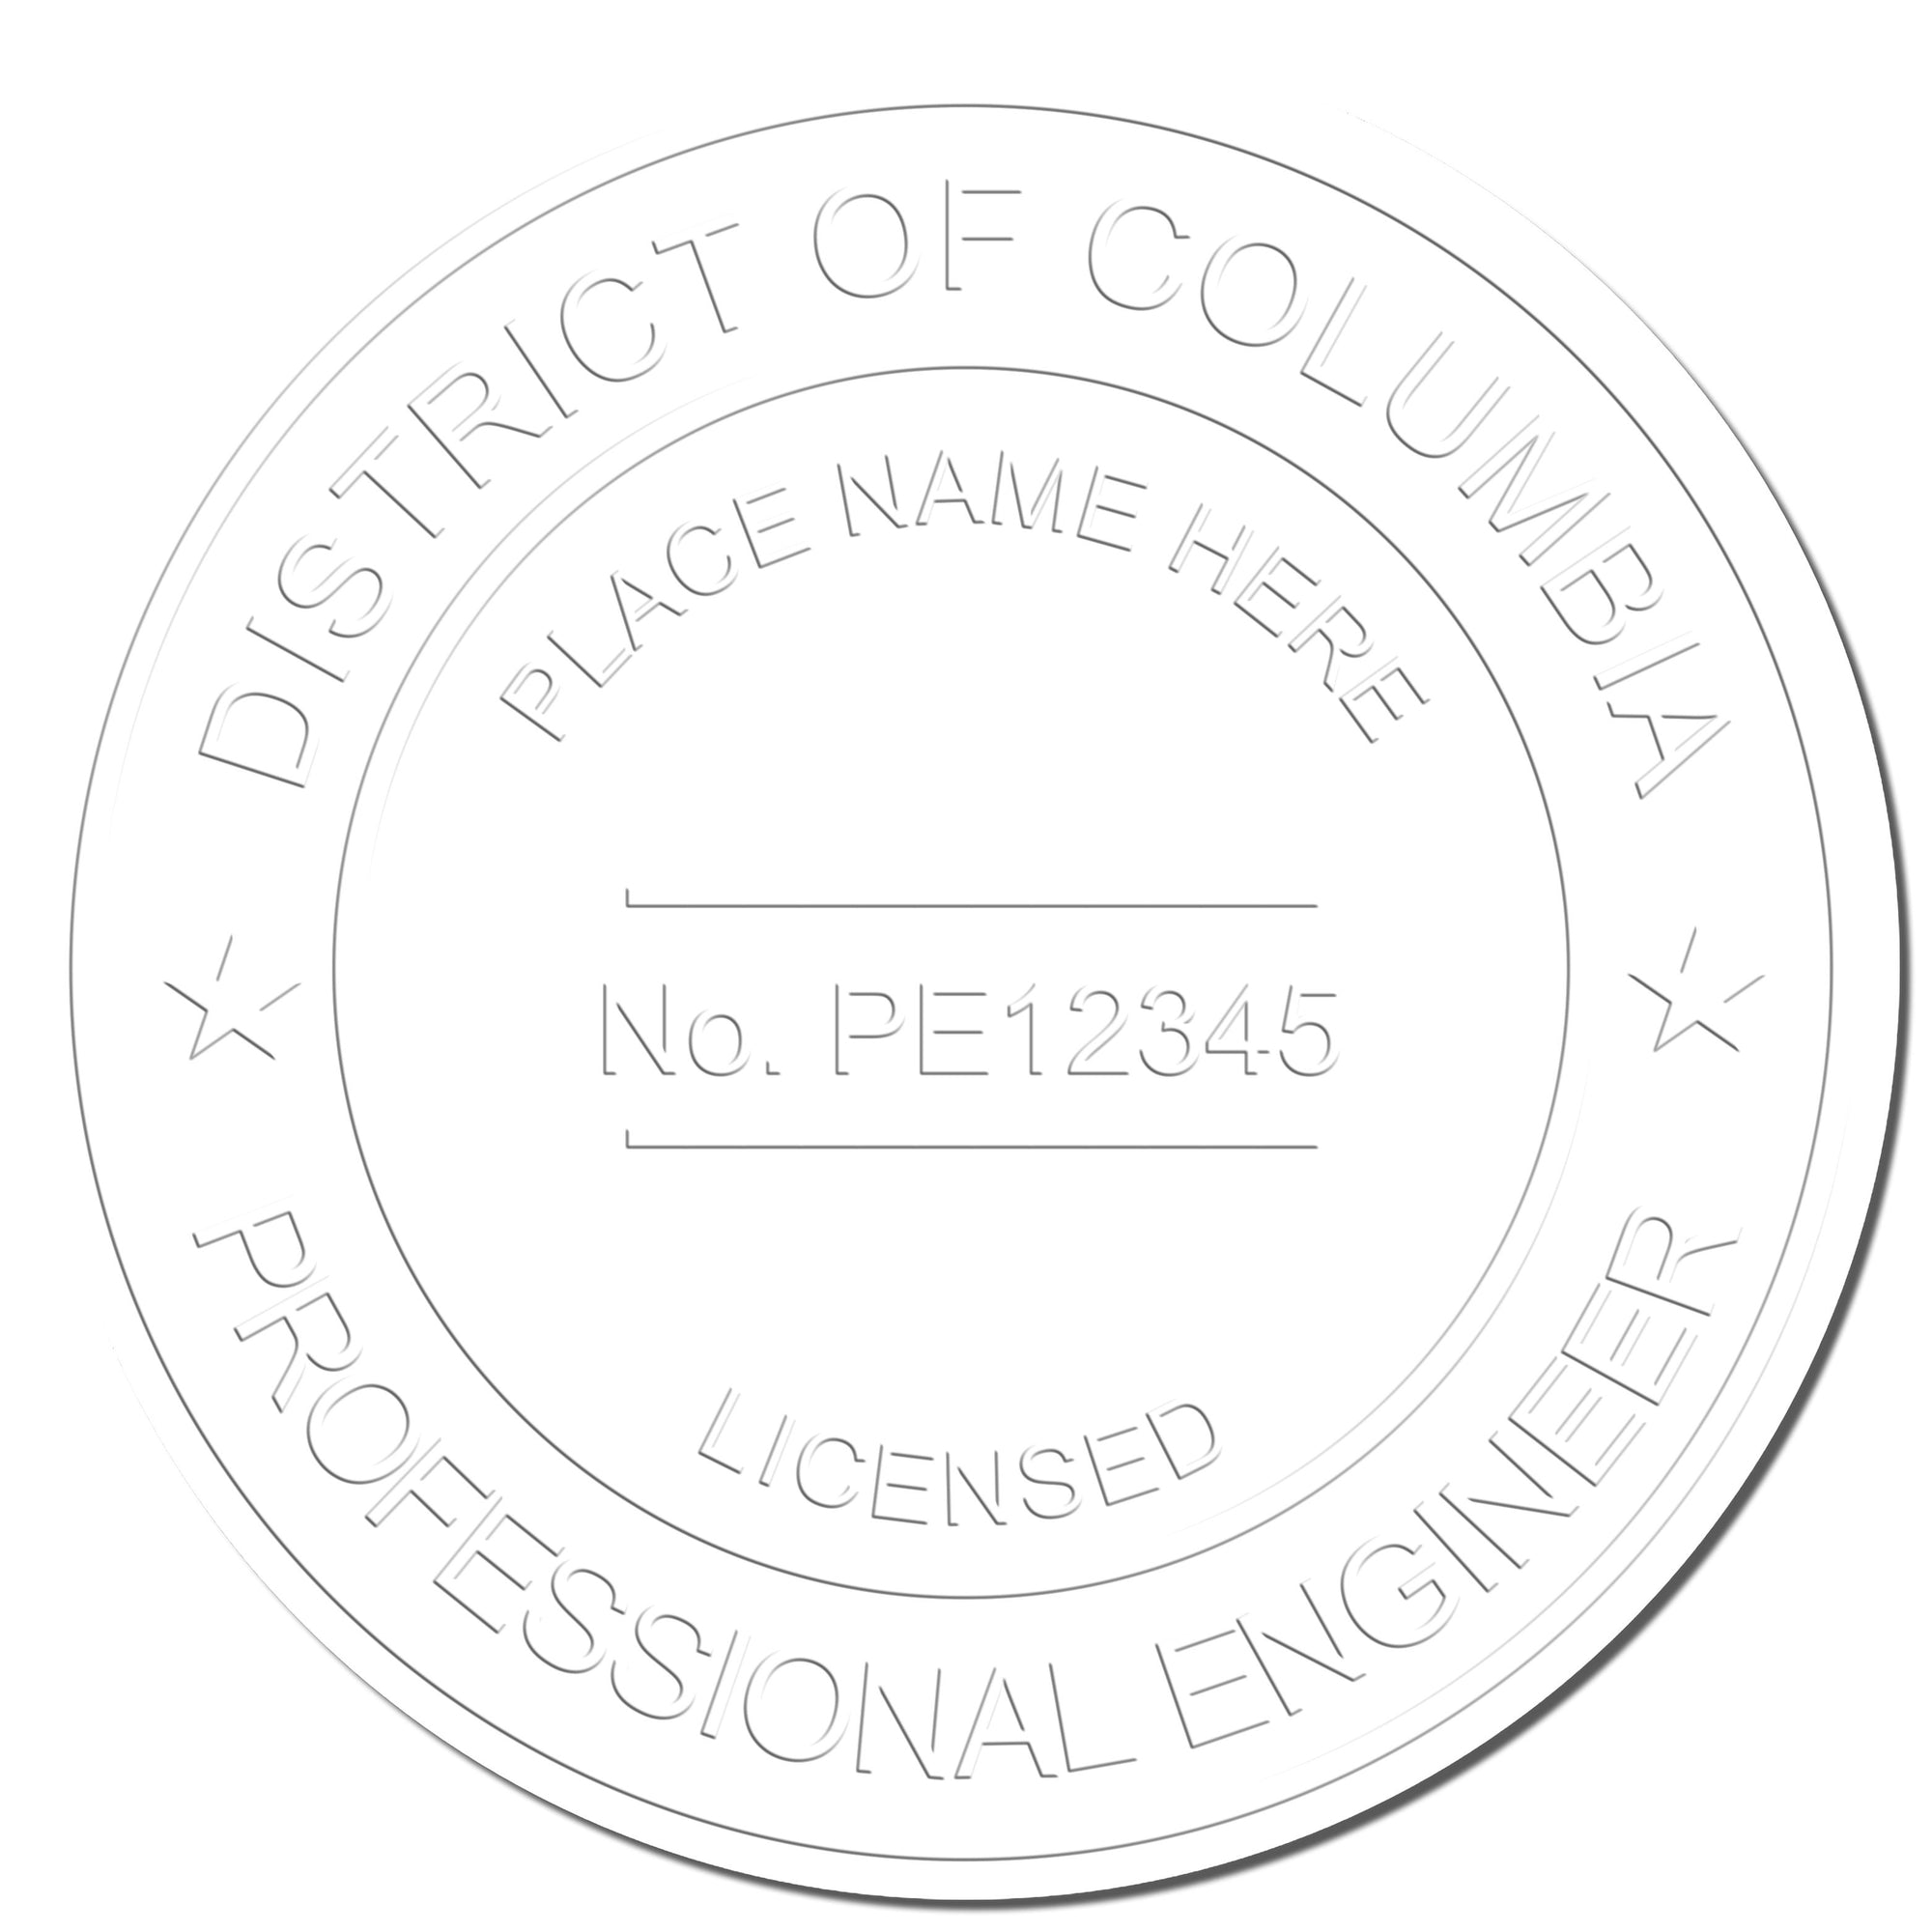 The main image for the District of Columbia Engineer Desk Seal depicting a sample of the imprint and electronic files